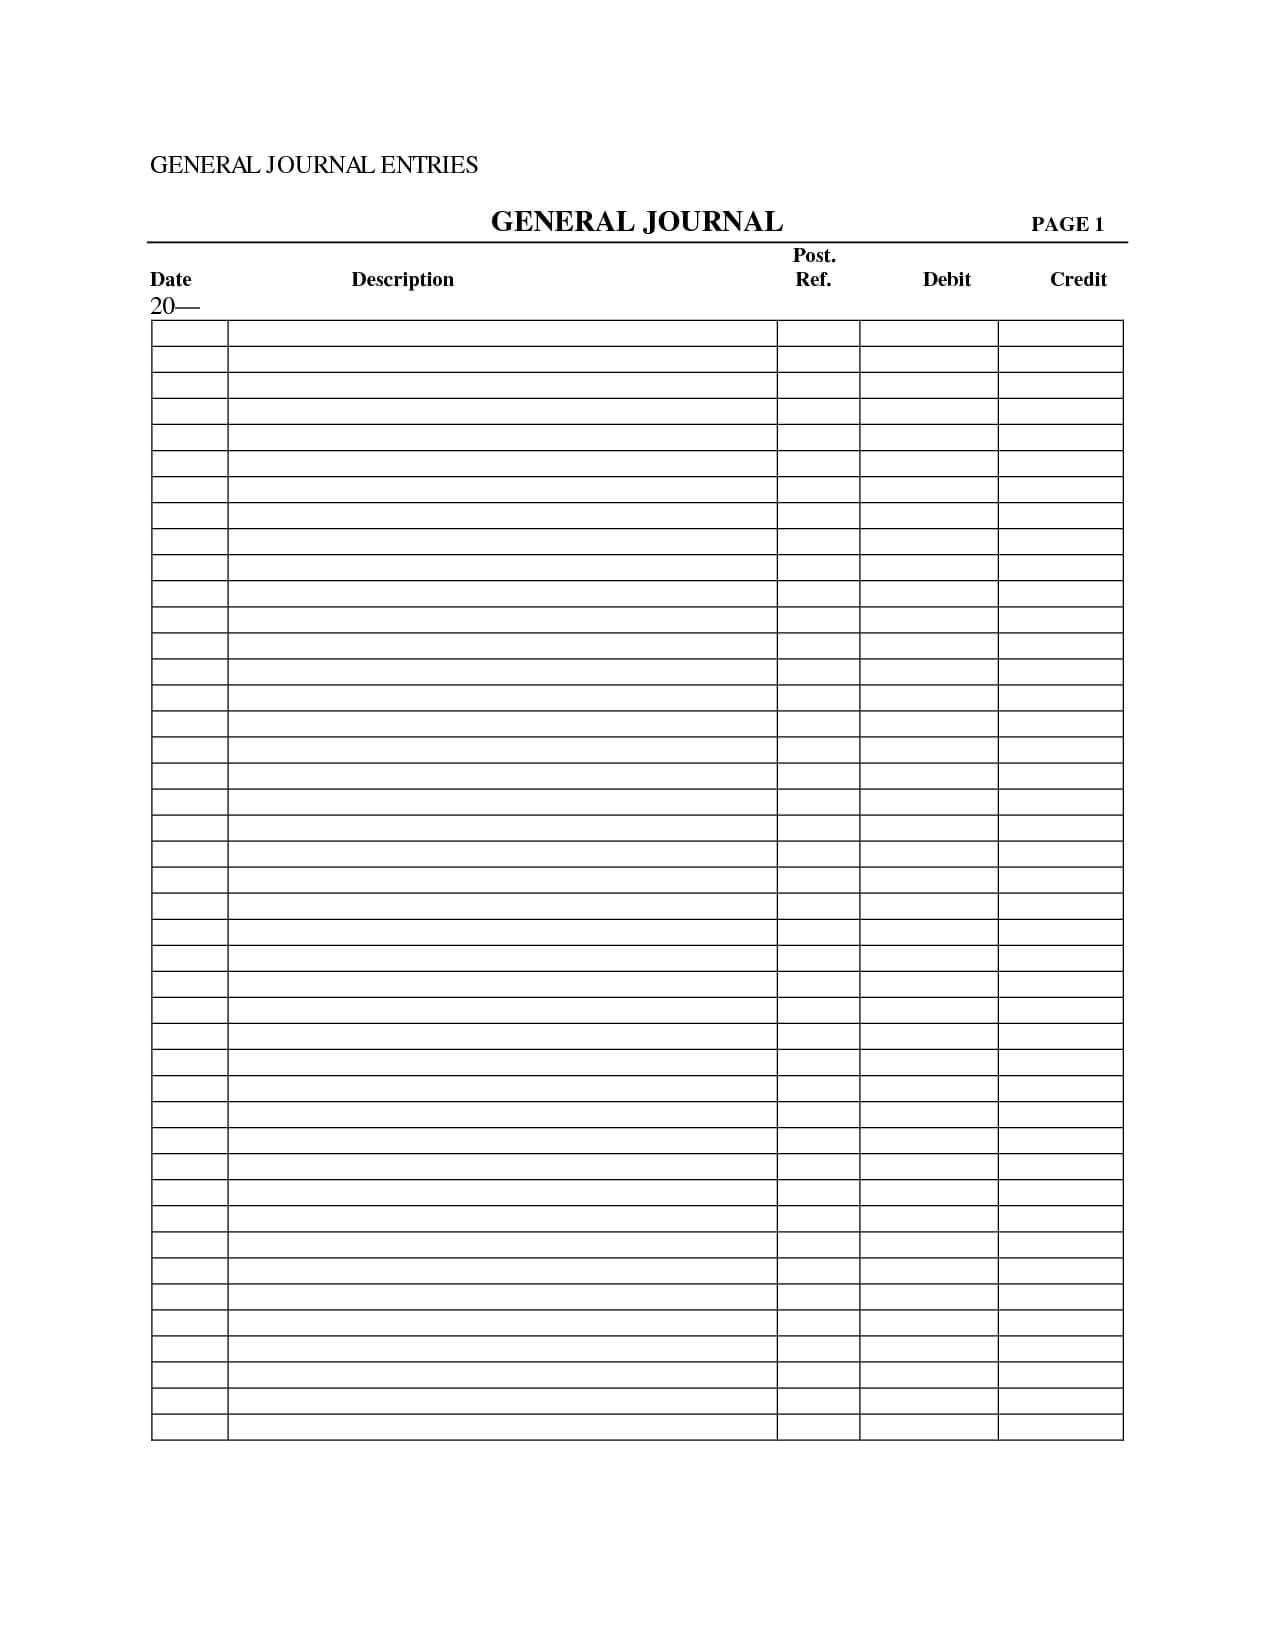 014 Accounting Journal Entry Template General 367979 Pertaining To Double Entry Journal Template For Word